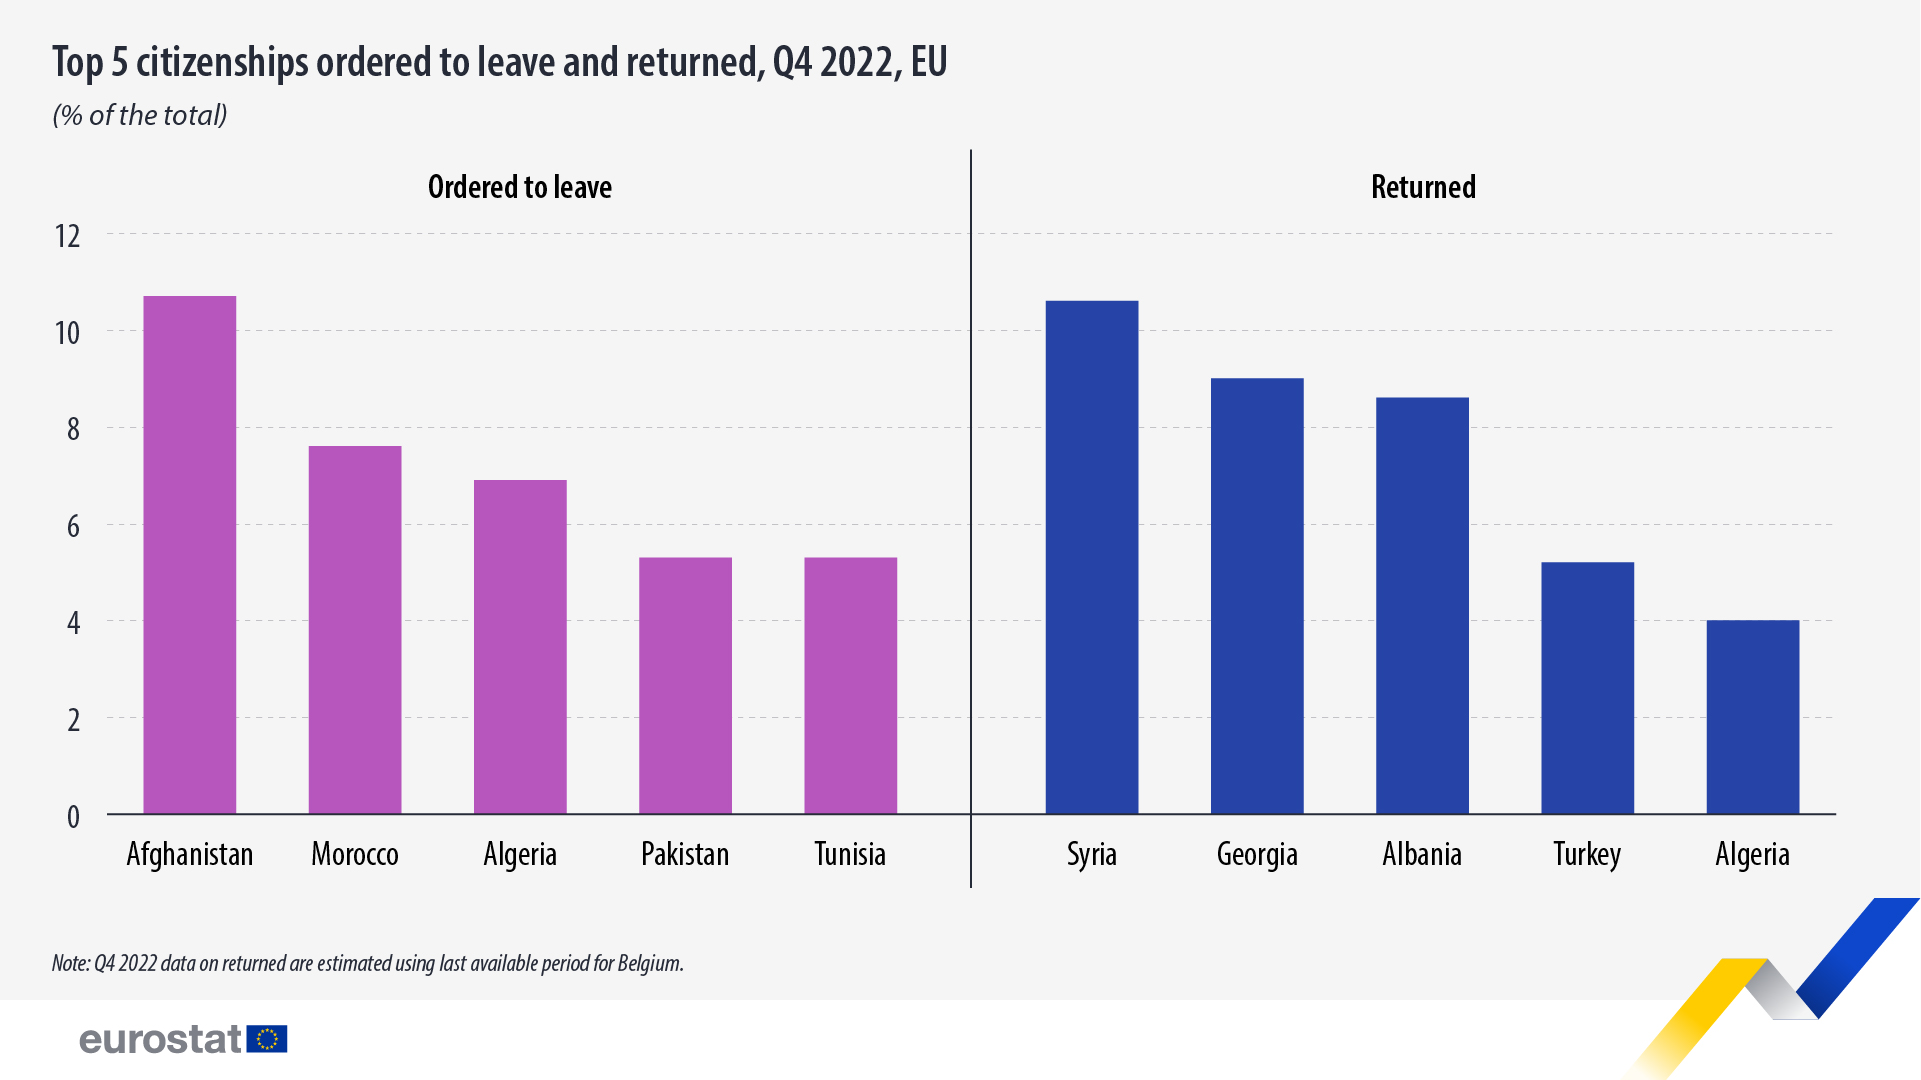 Top 5 citizenships ordered to leave and returned, Q4 2022, EU, as a % of the total